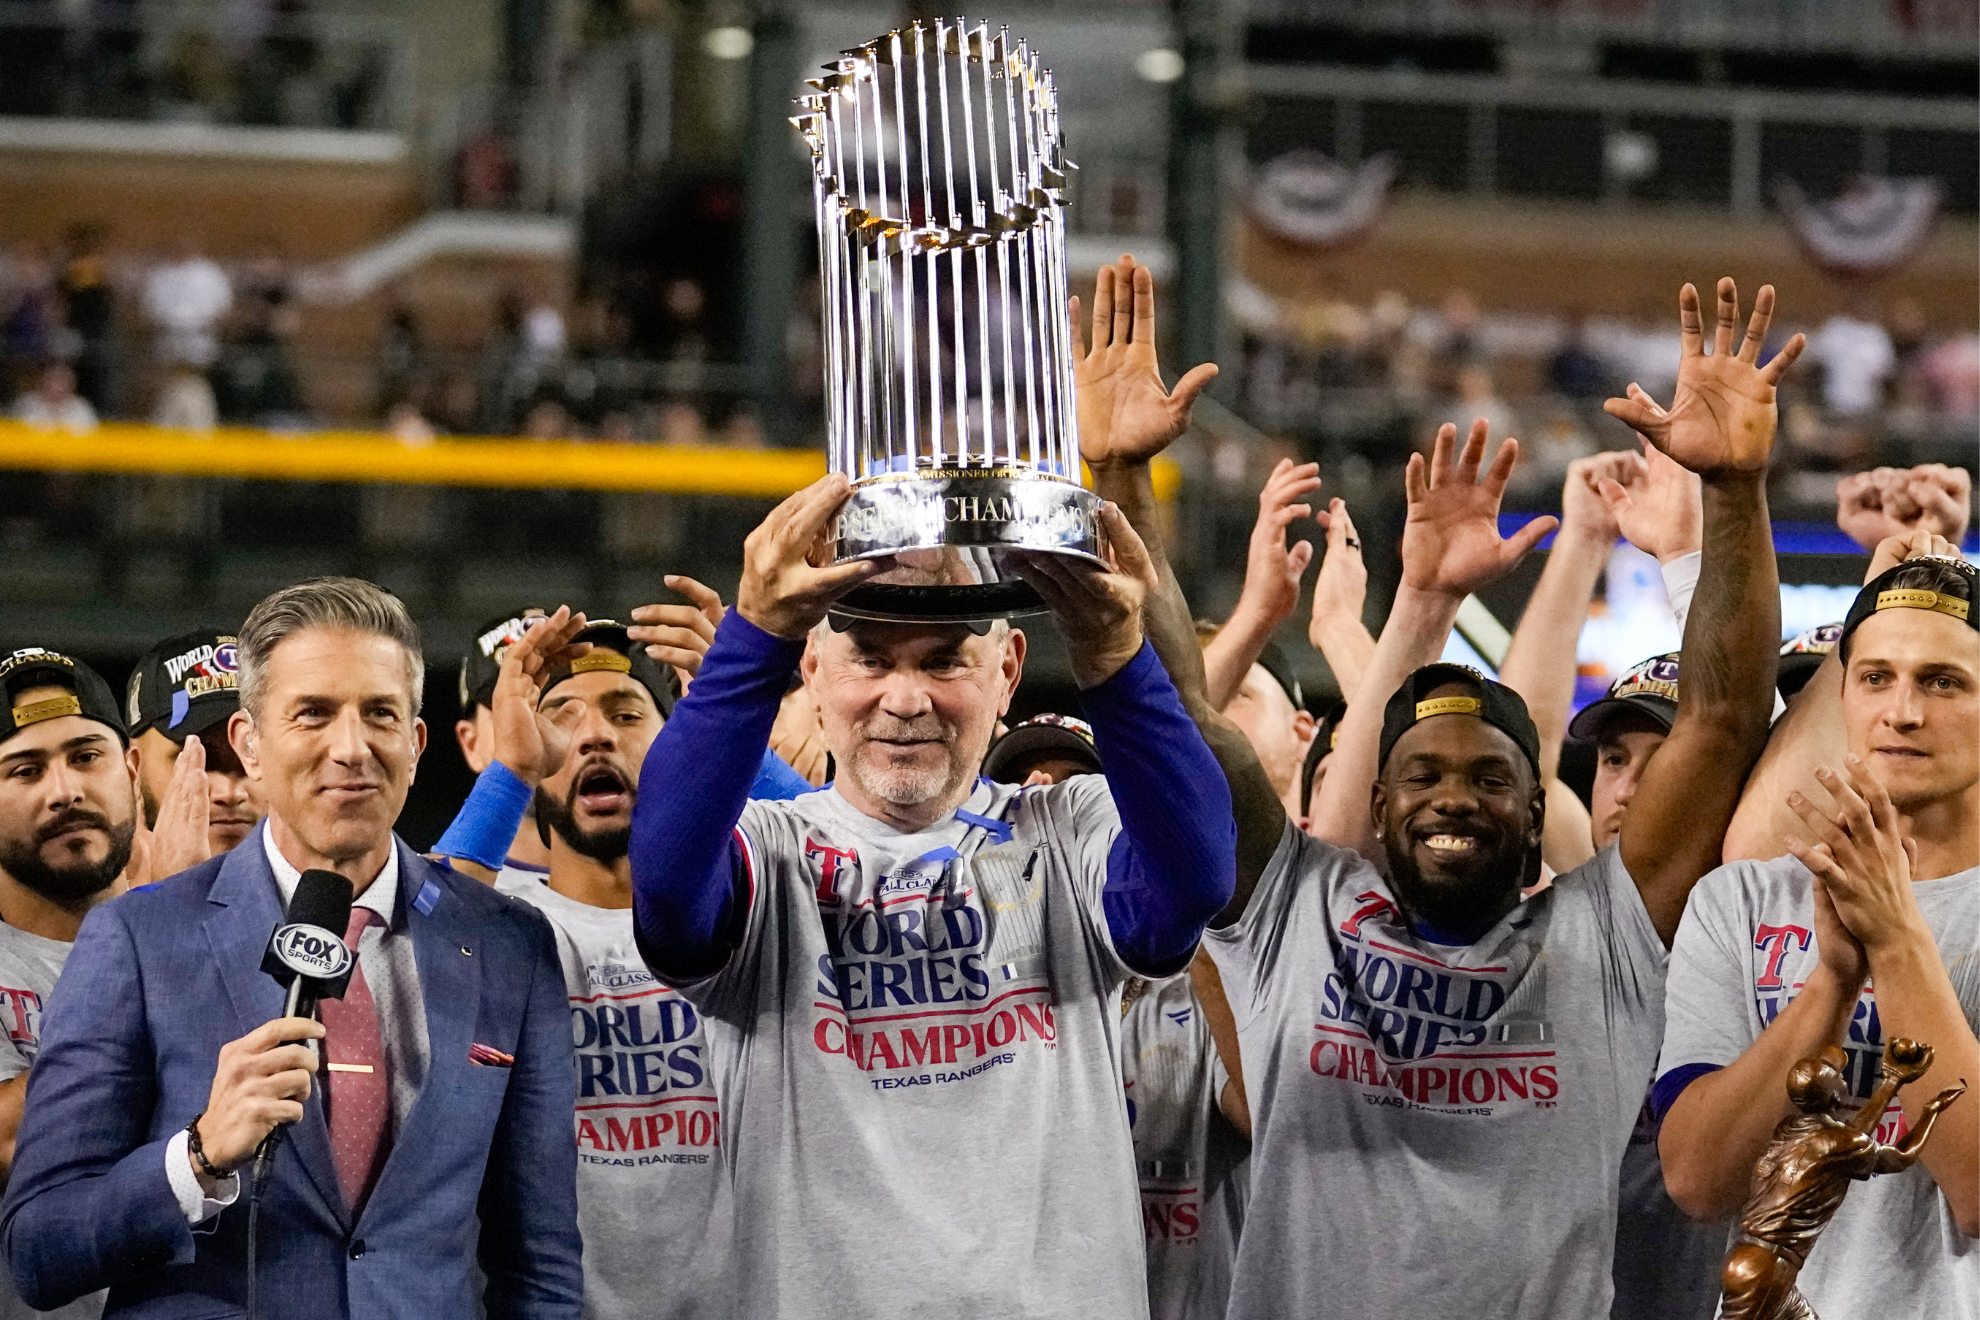 The Rangers' Bruce Bochy lifts the Commissoner's Trophy. This is the fourth time he has won the World Series as a manager.